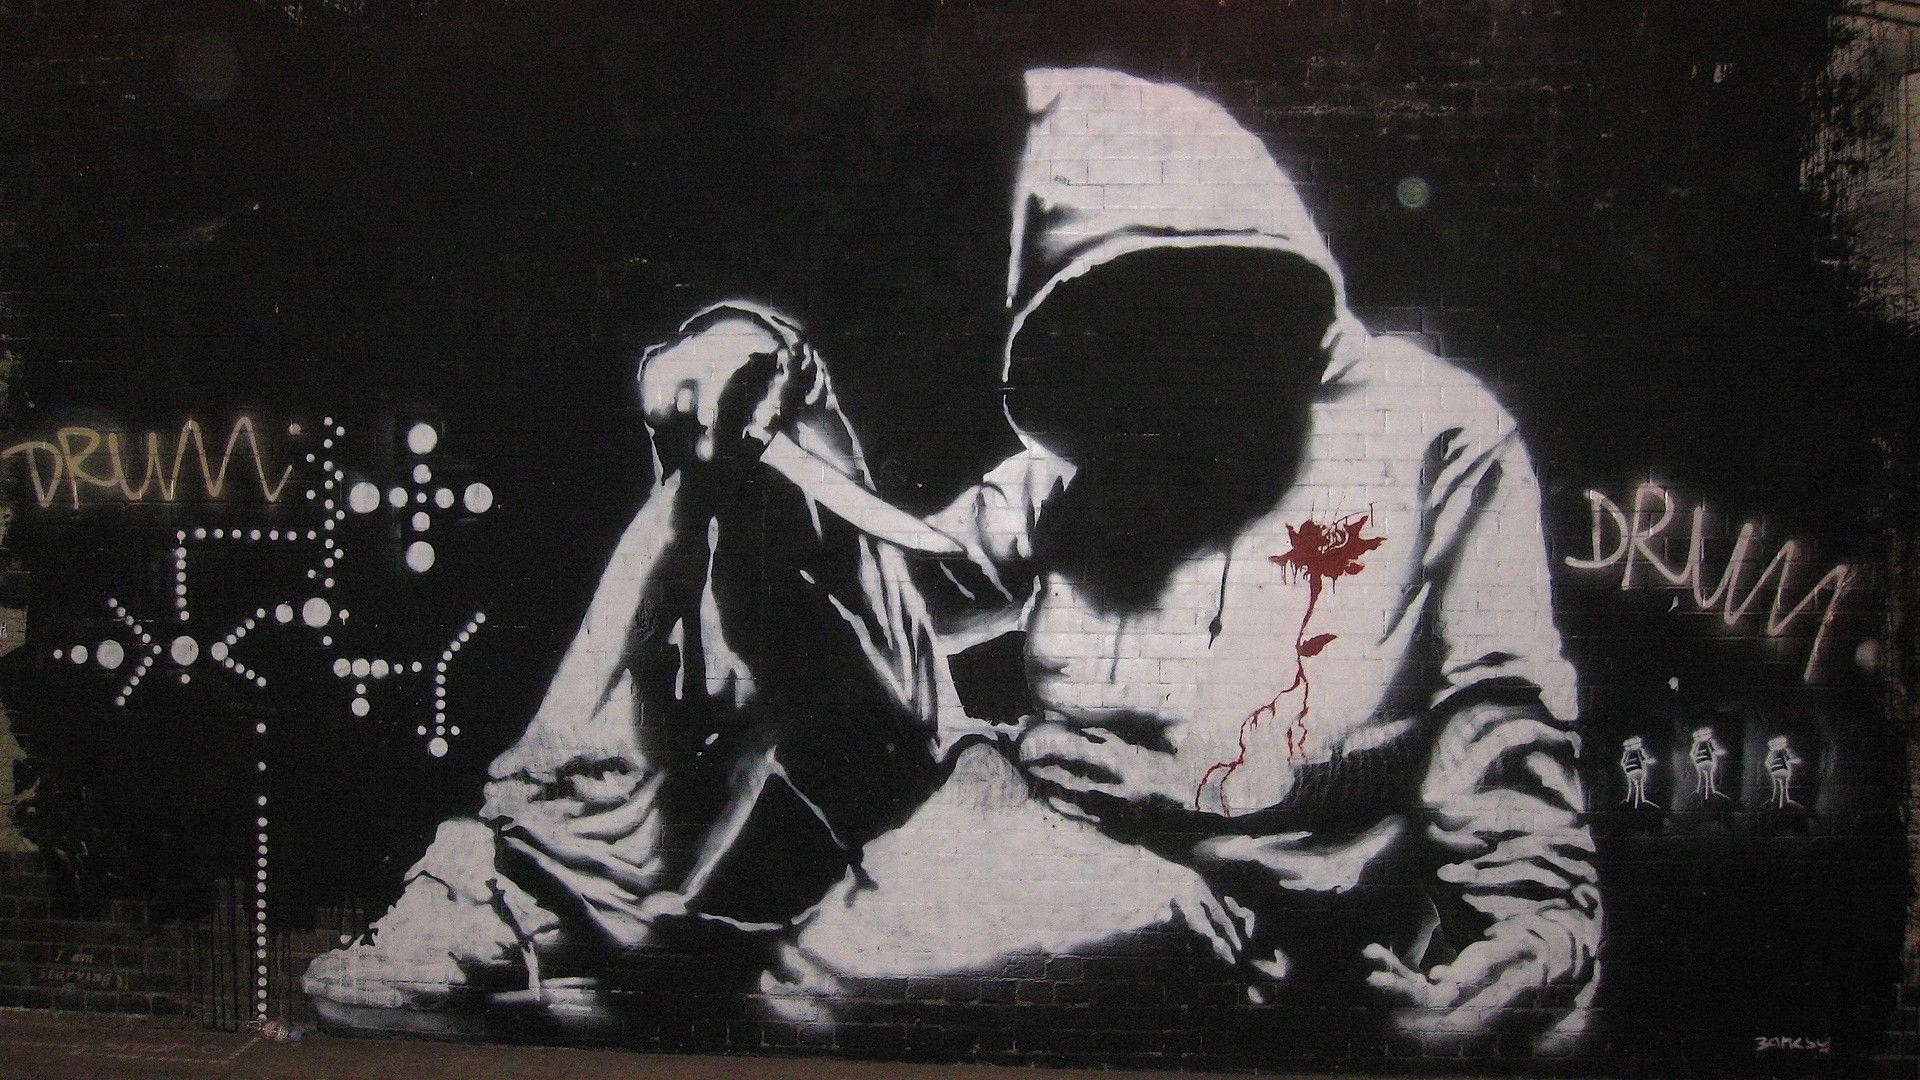 1920x1080 Banksy Collage 2 - Graffiti & Abstract Background Wallpapers on .